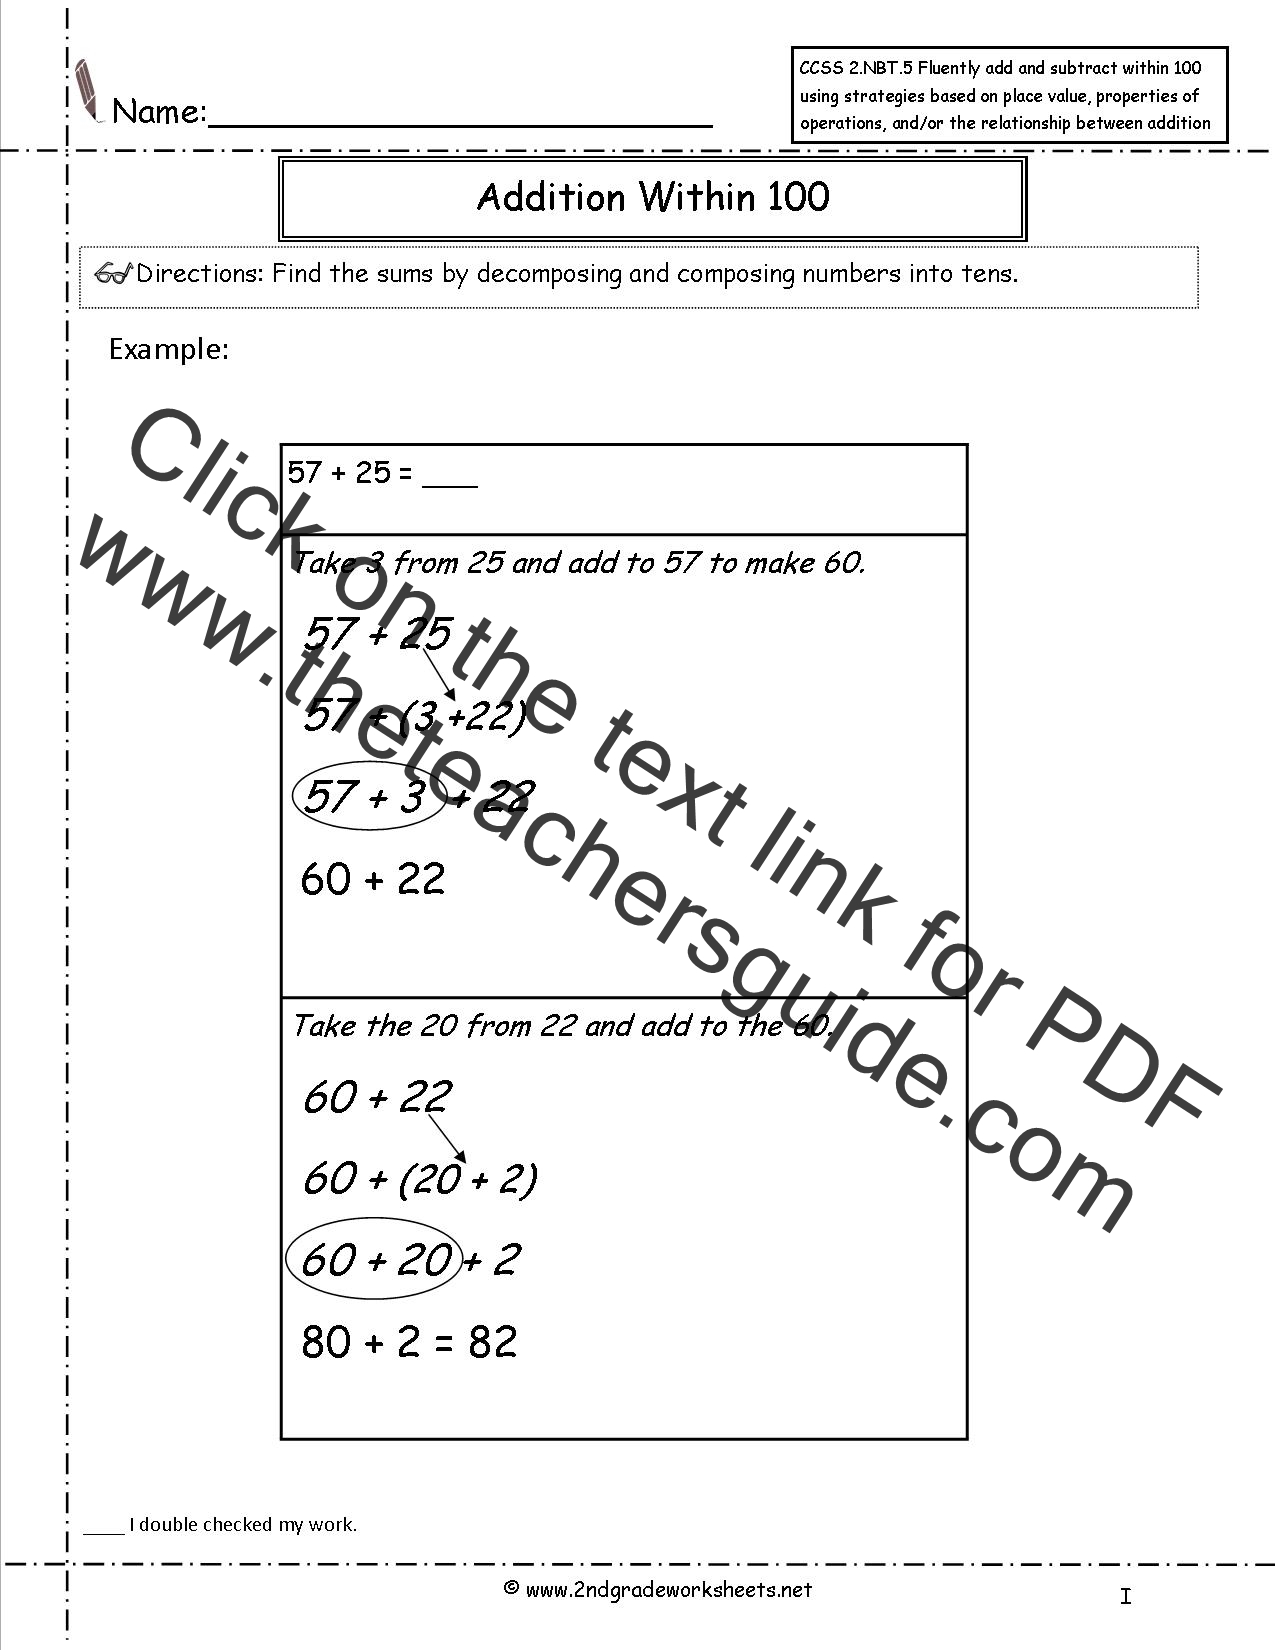 Common Core Math Worksheets Addition And Subtraction 2nd grade math